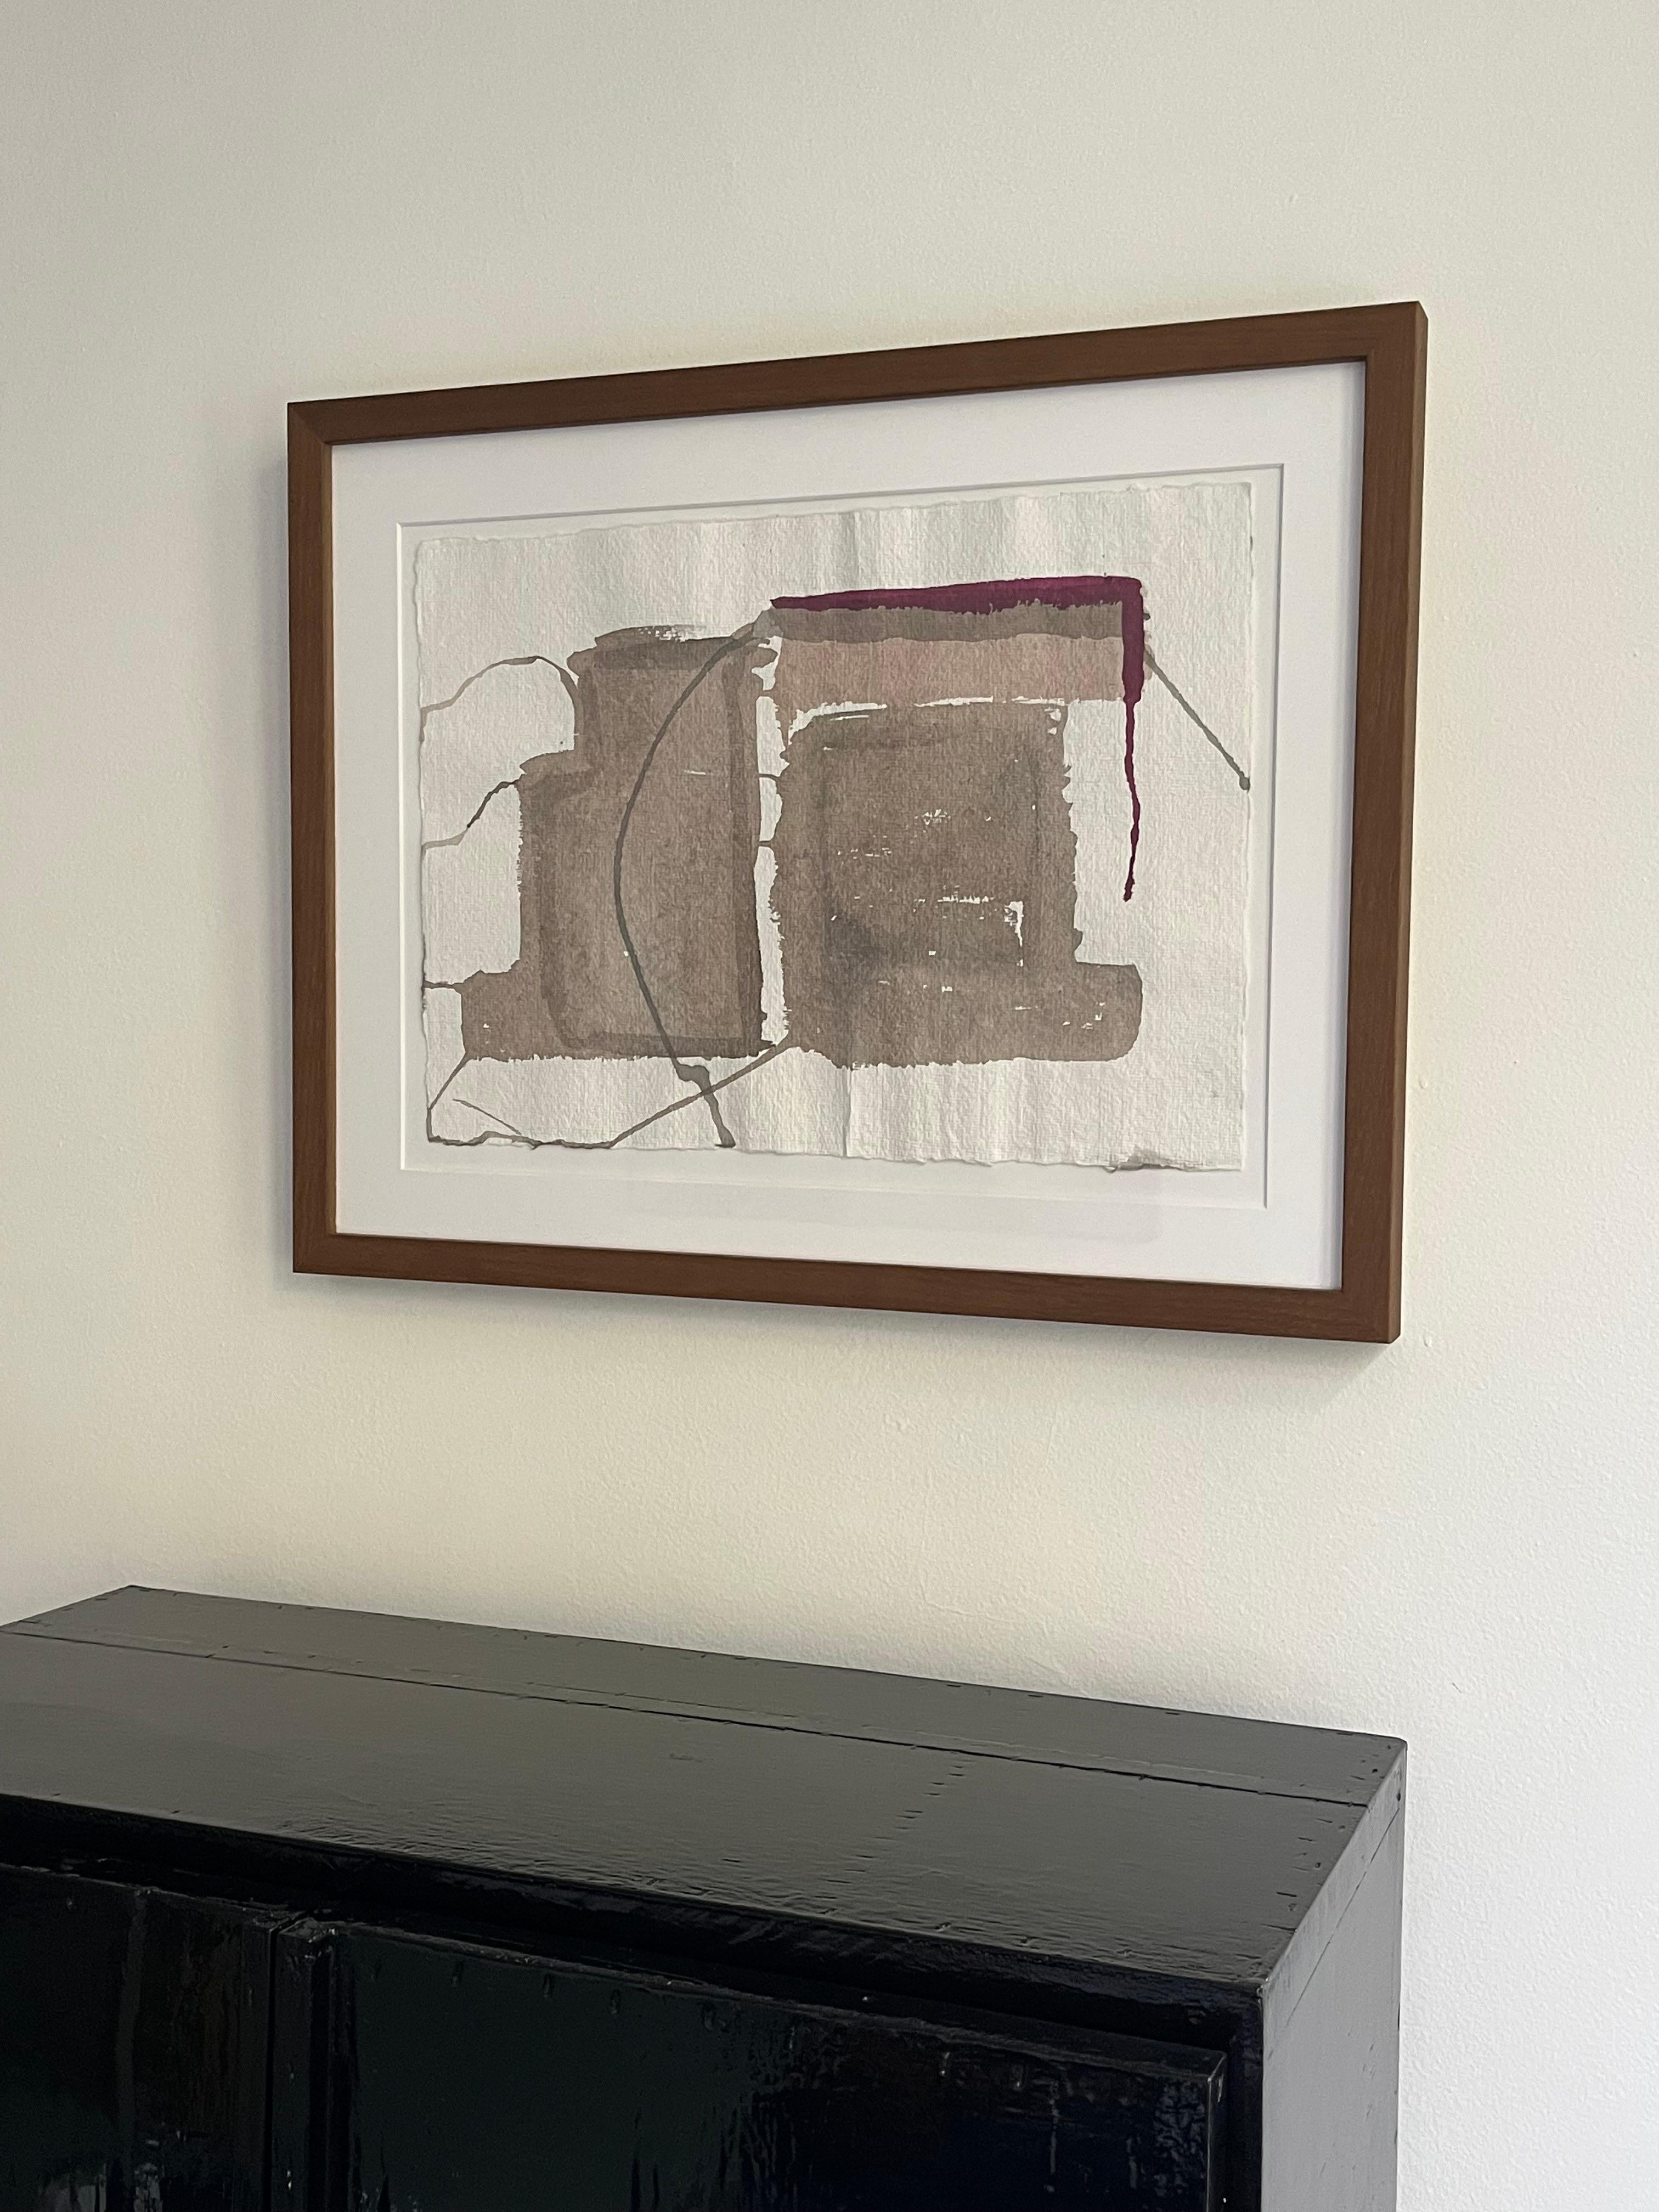 Offering this unique drawing - ink on paper, professionally framed in wood. 

About BAS:

Begoña Allendesalazar (